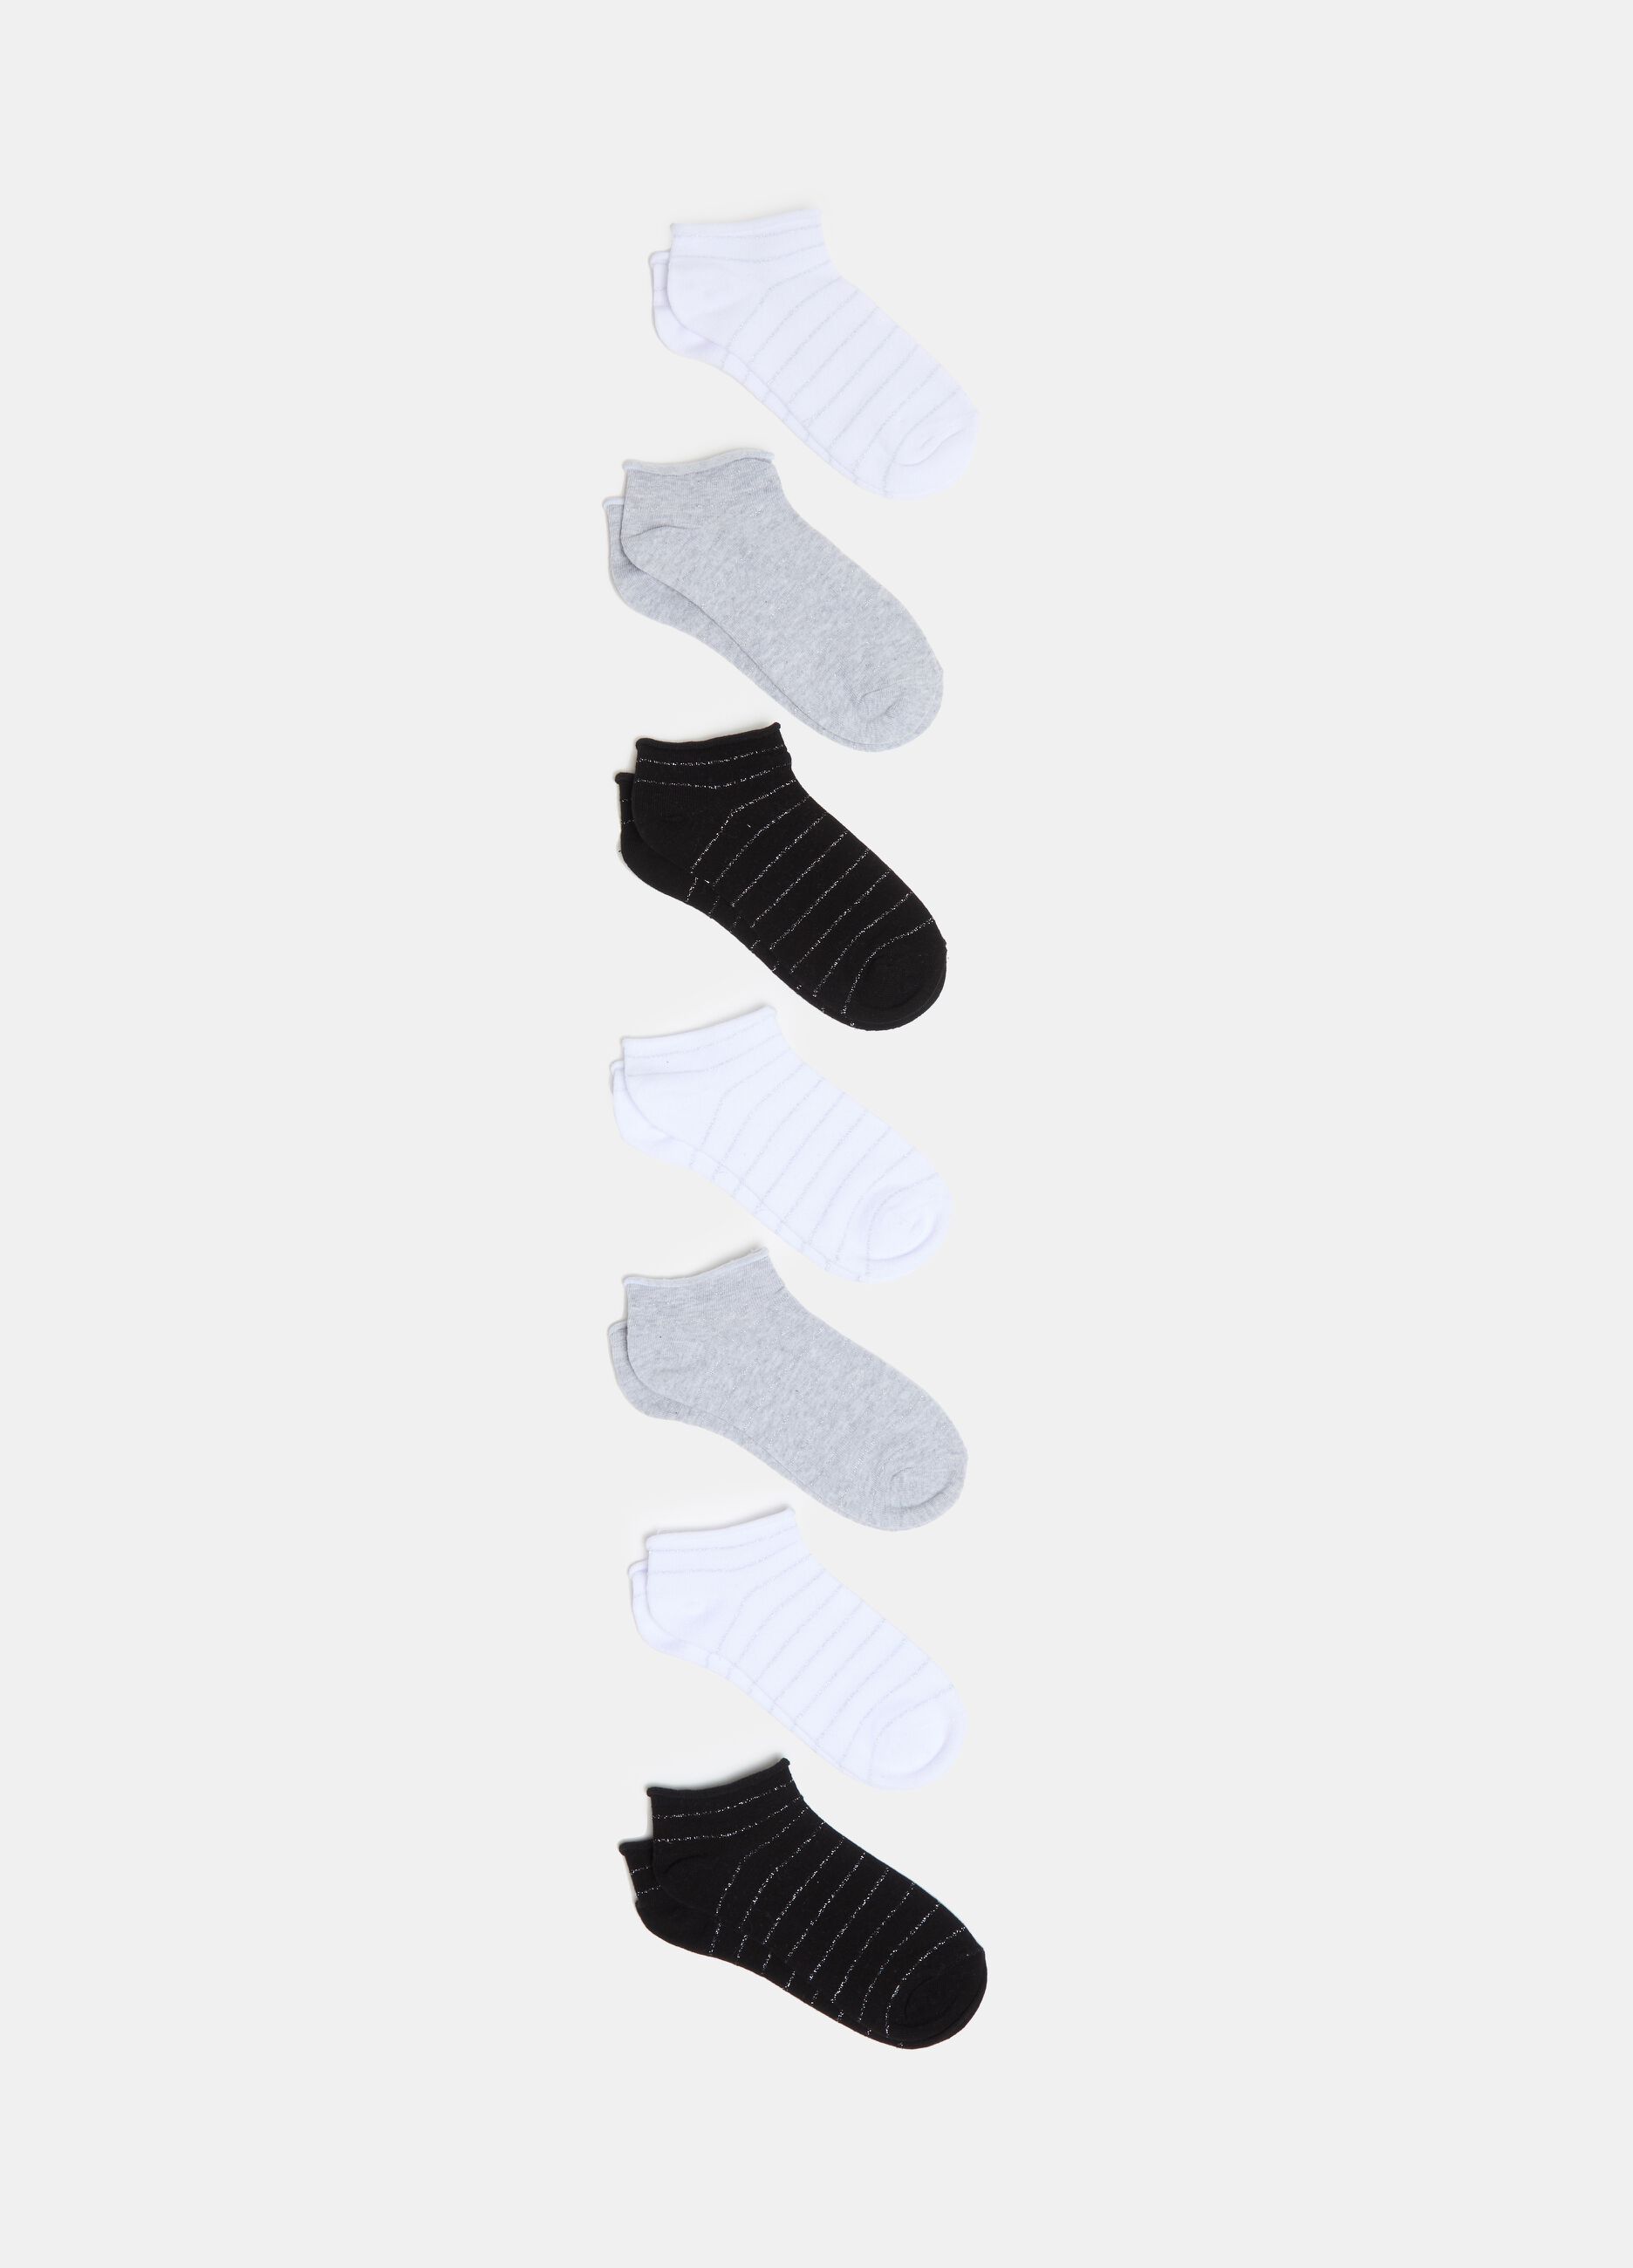 Seven-pair pack shoe liners with striped design